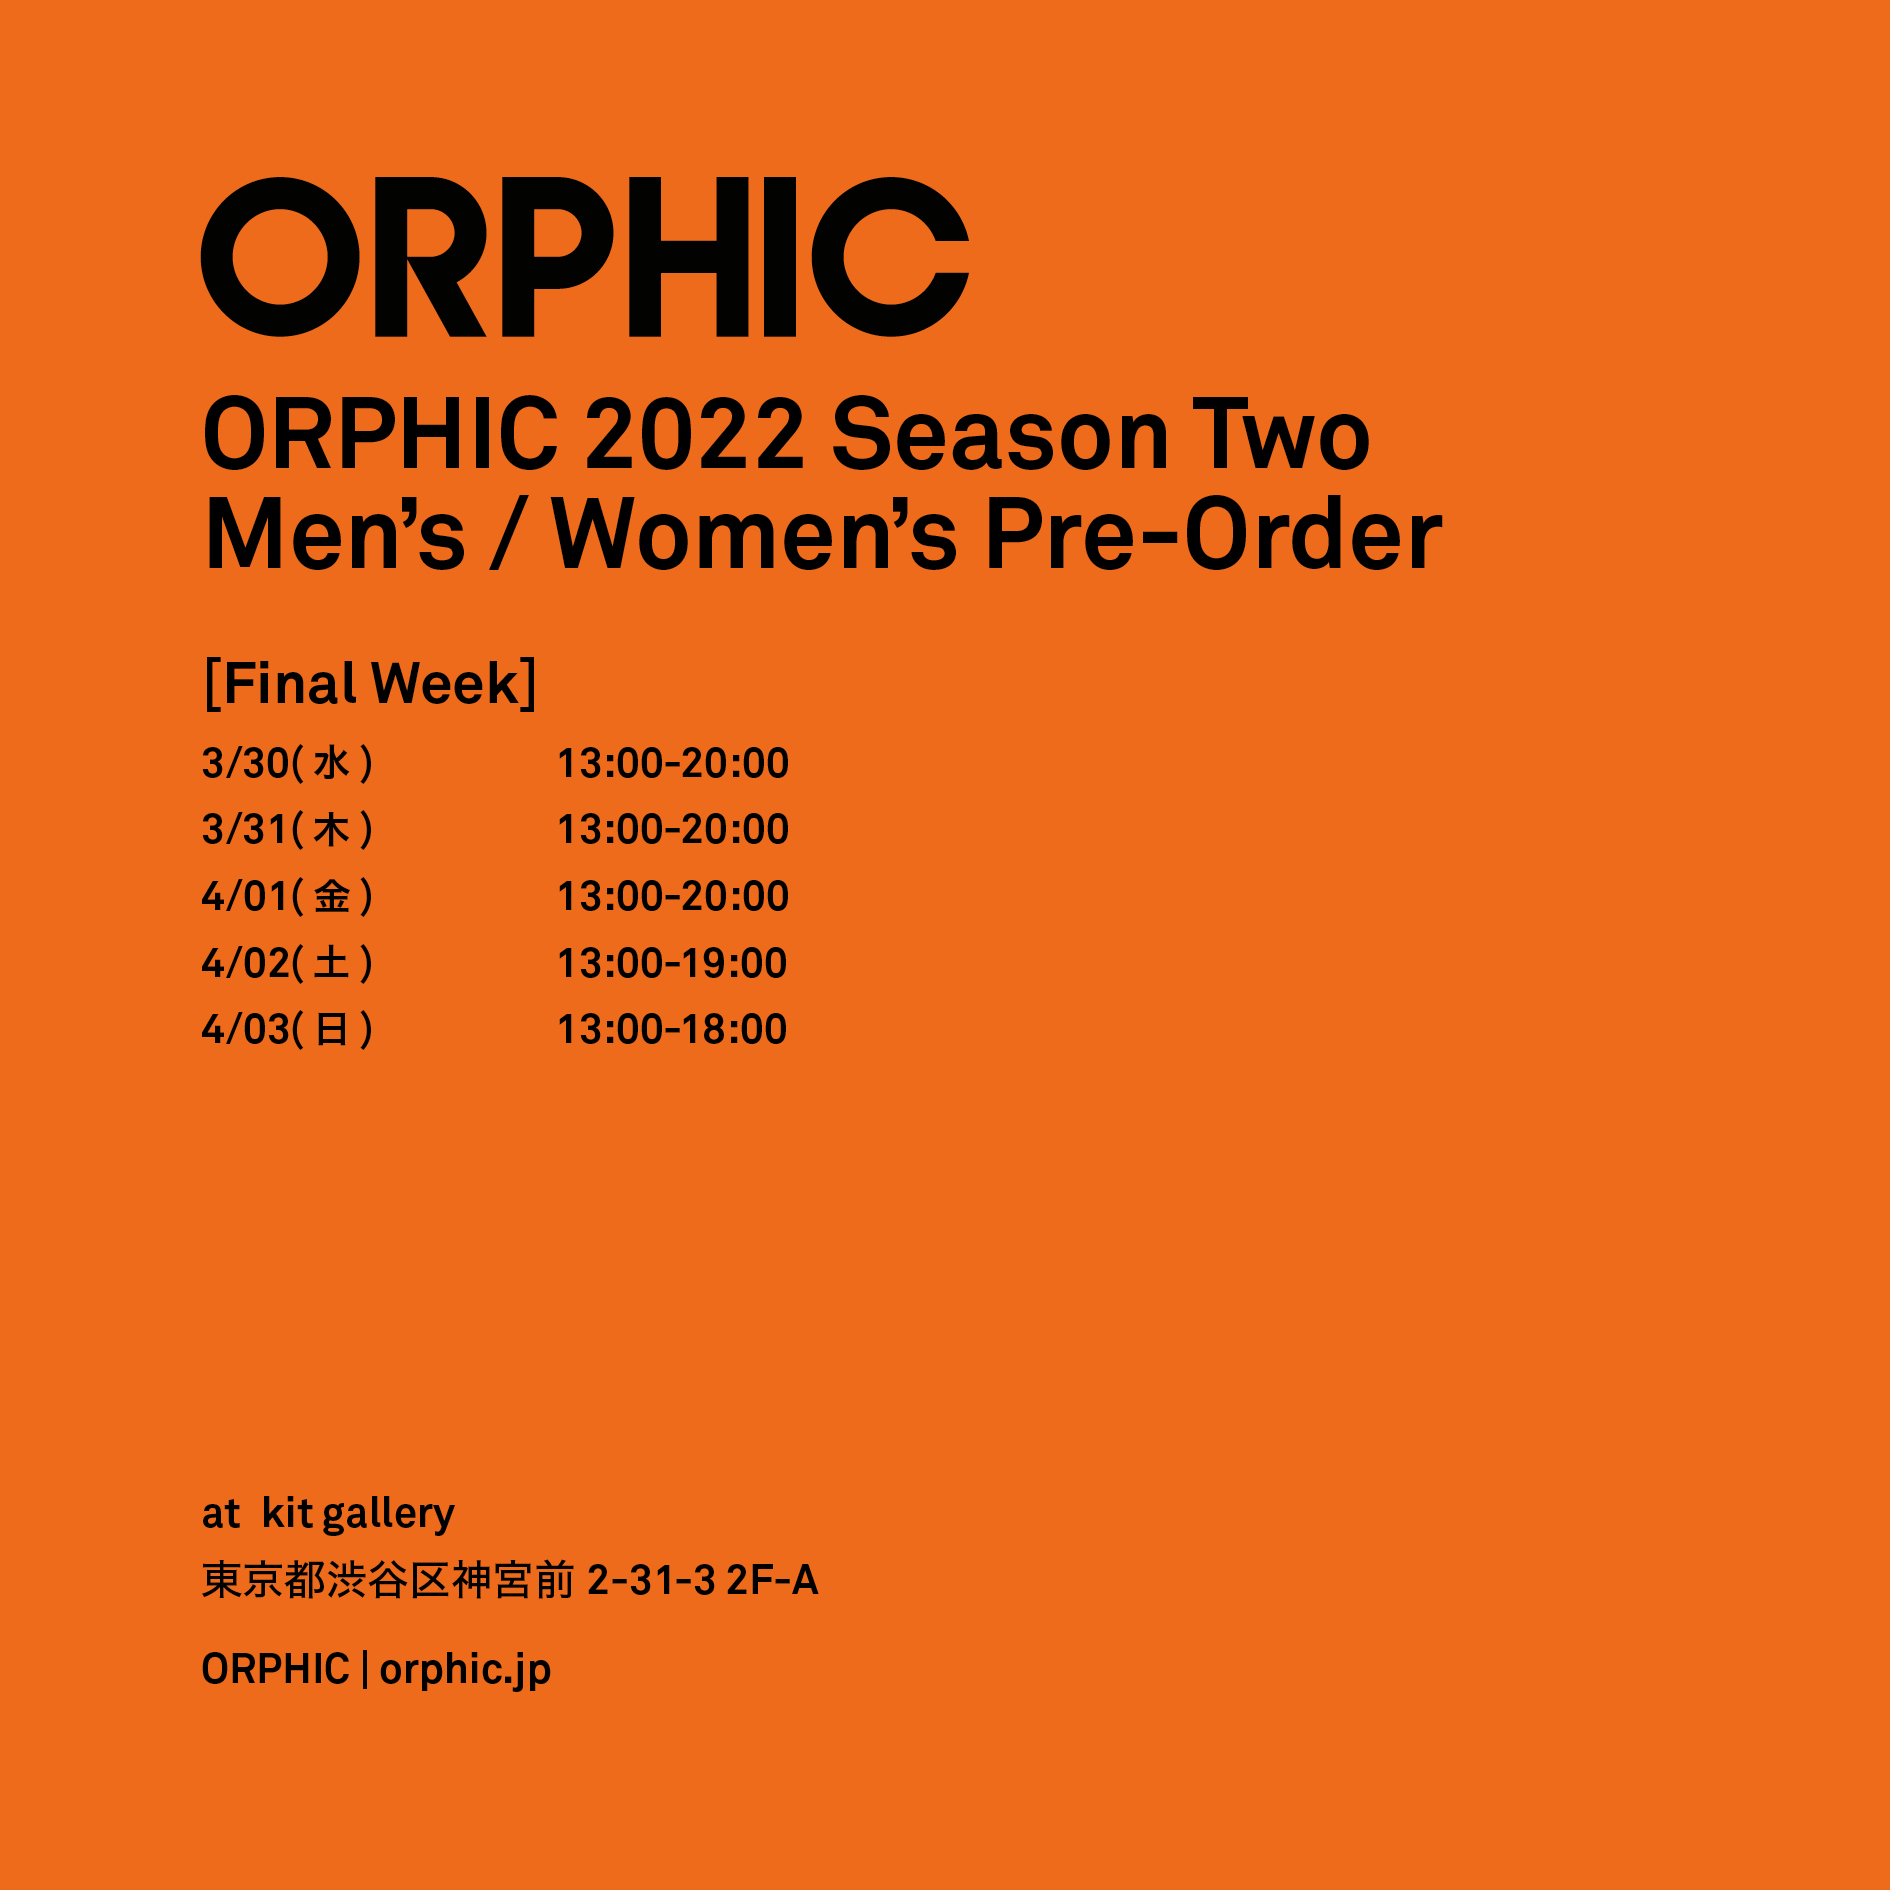 https://kit-gallery.com/schedule/files/20220215_ORPHIC_22AW_FLY_4.JPG